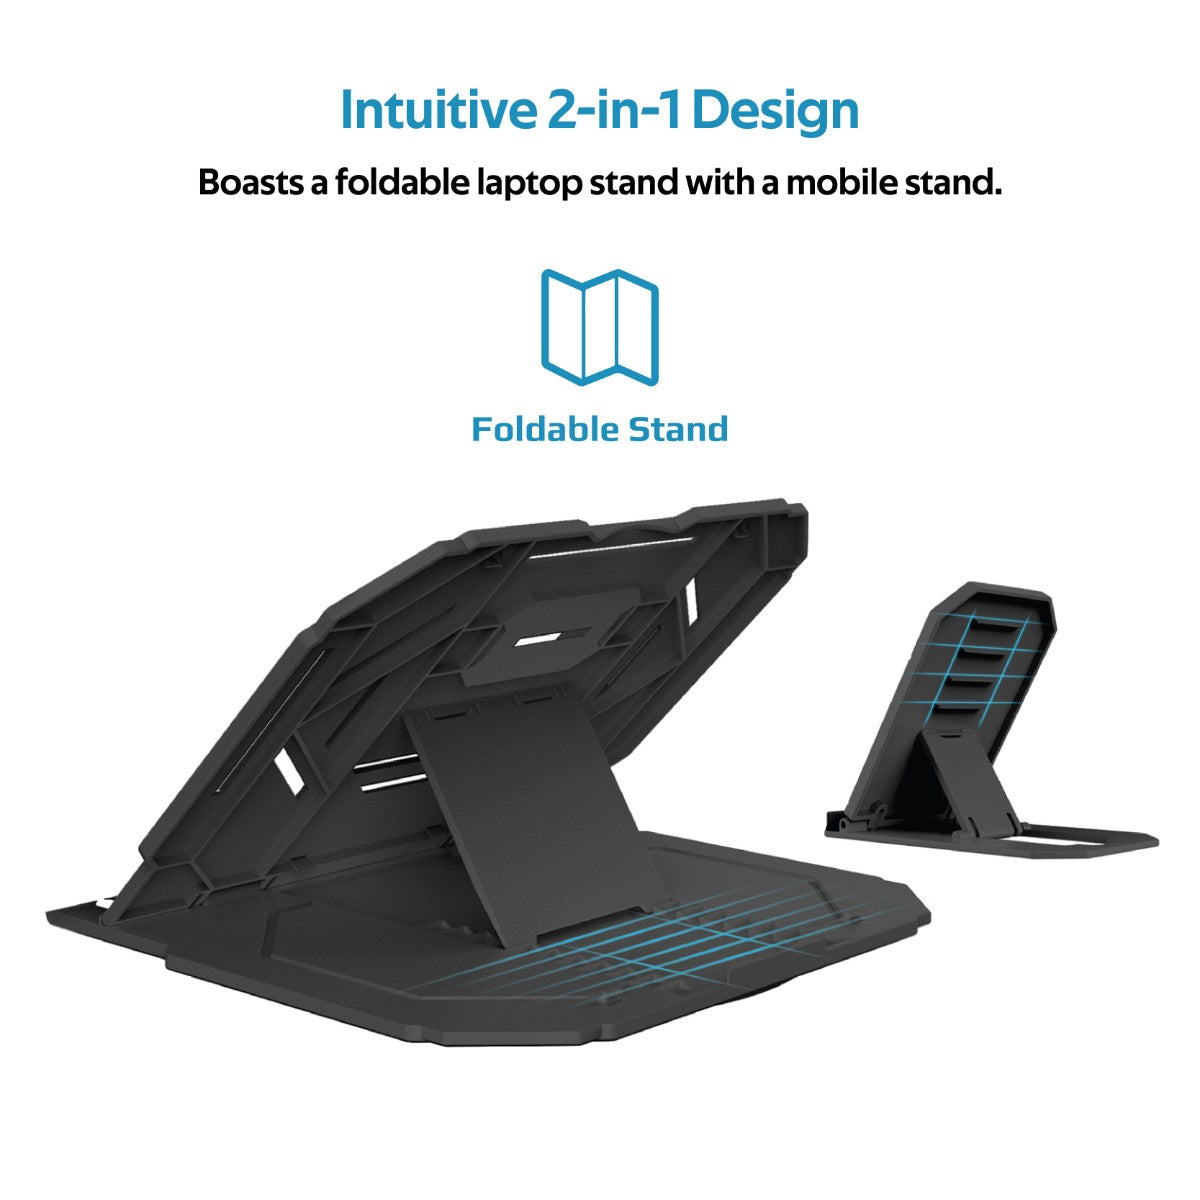 Promate Laptop Stand, 2-In-1 Foldable Laptop and Smartphone Riser Stand with 360 Degree Rotatable Base, Multi-Angle Adjustable Height and Anti-Slip Grip for Laptops, Smartphone, Notebooks, ProCooler-1